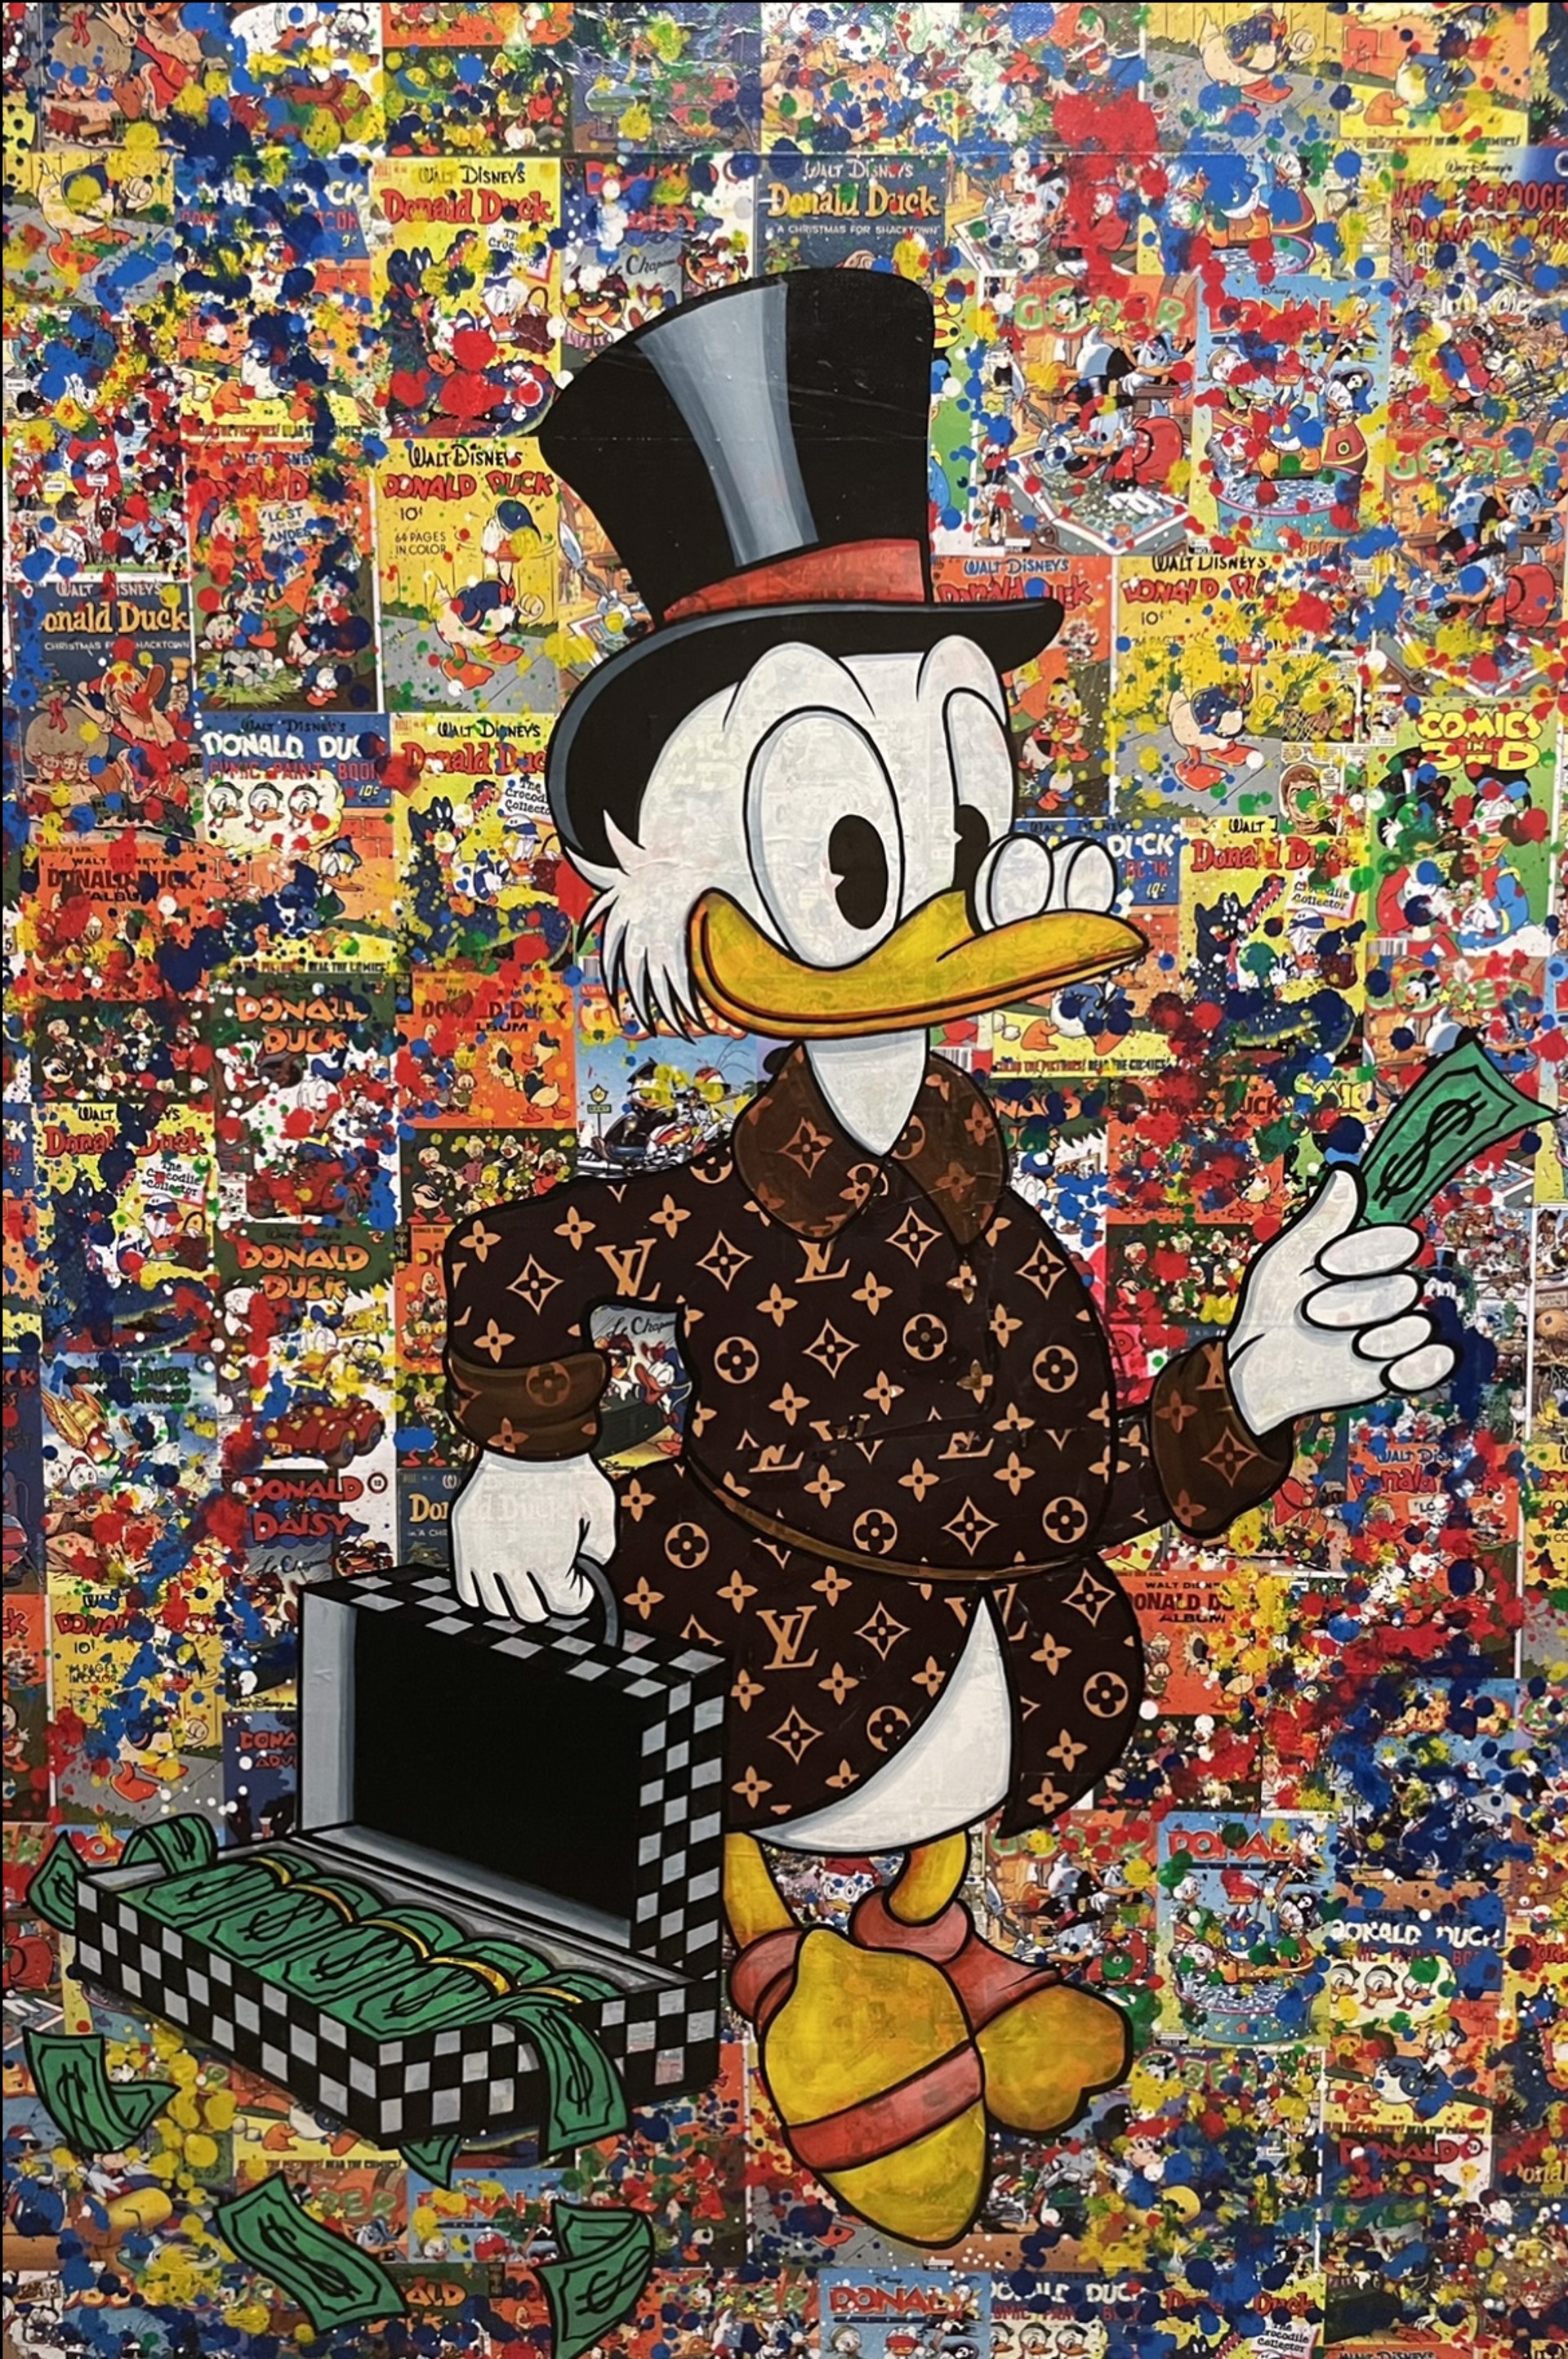 "Scrooge McDuck" by BuMa Project